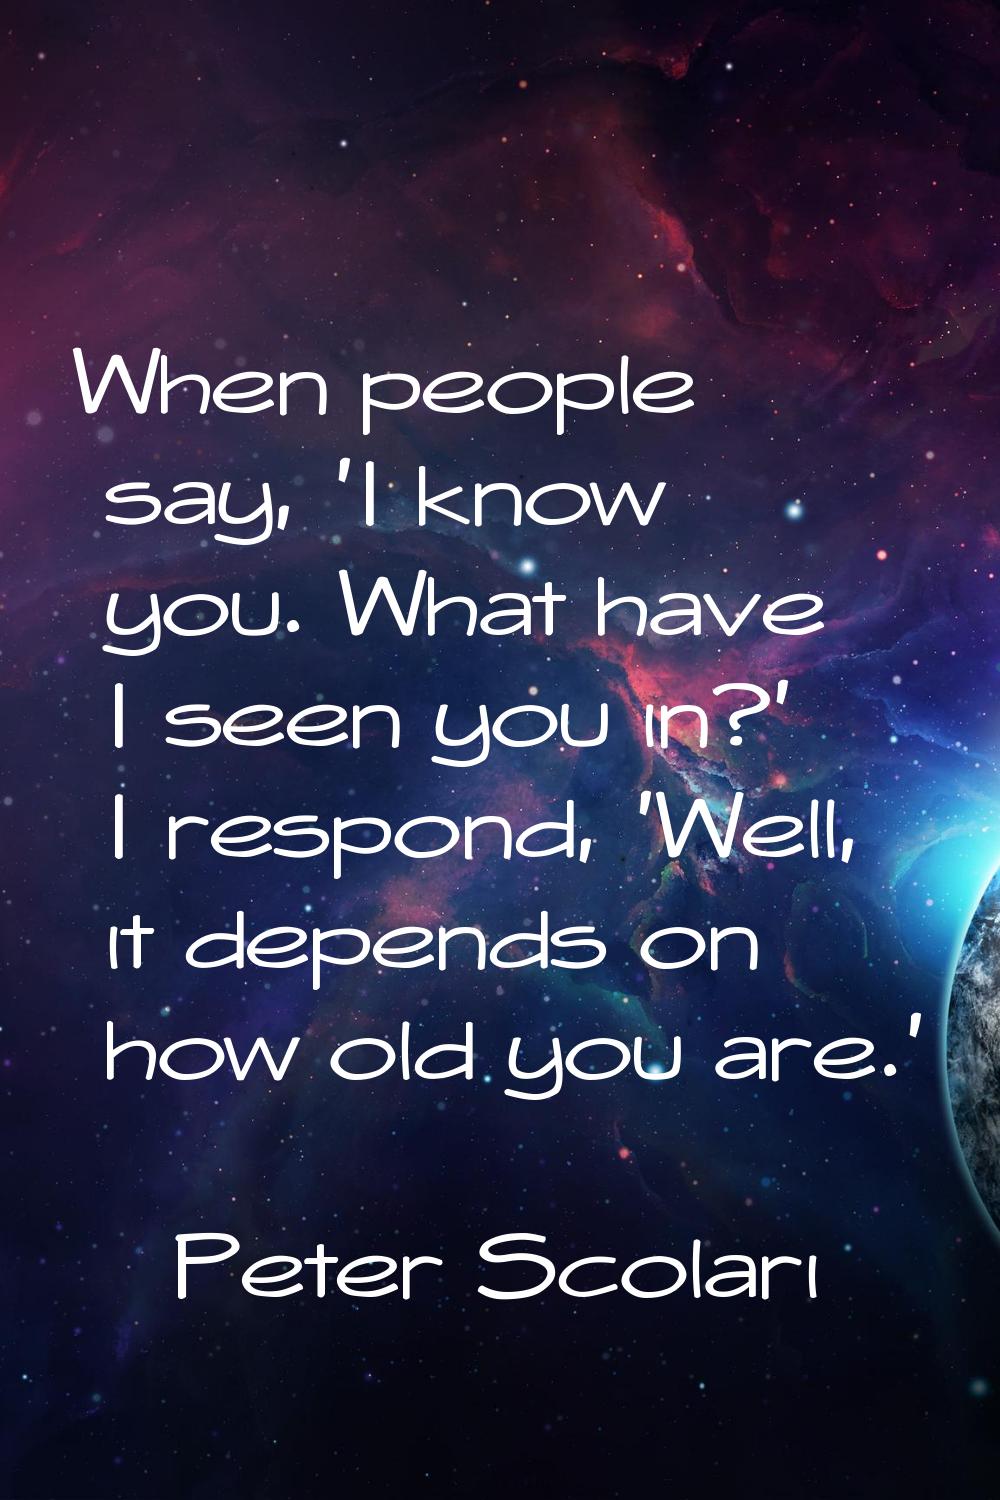 When people say, 'I know you. What have I seen you in?' I respond, 'Well, it depends on how old you